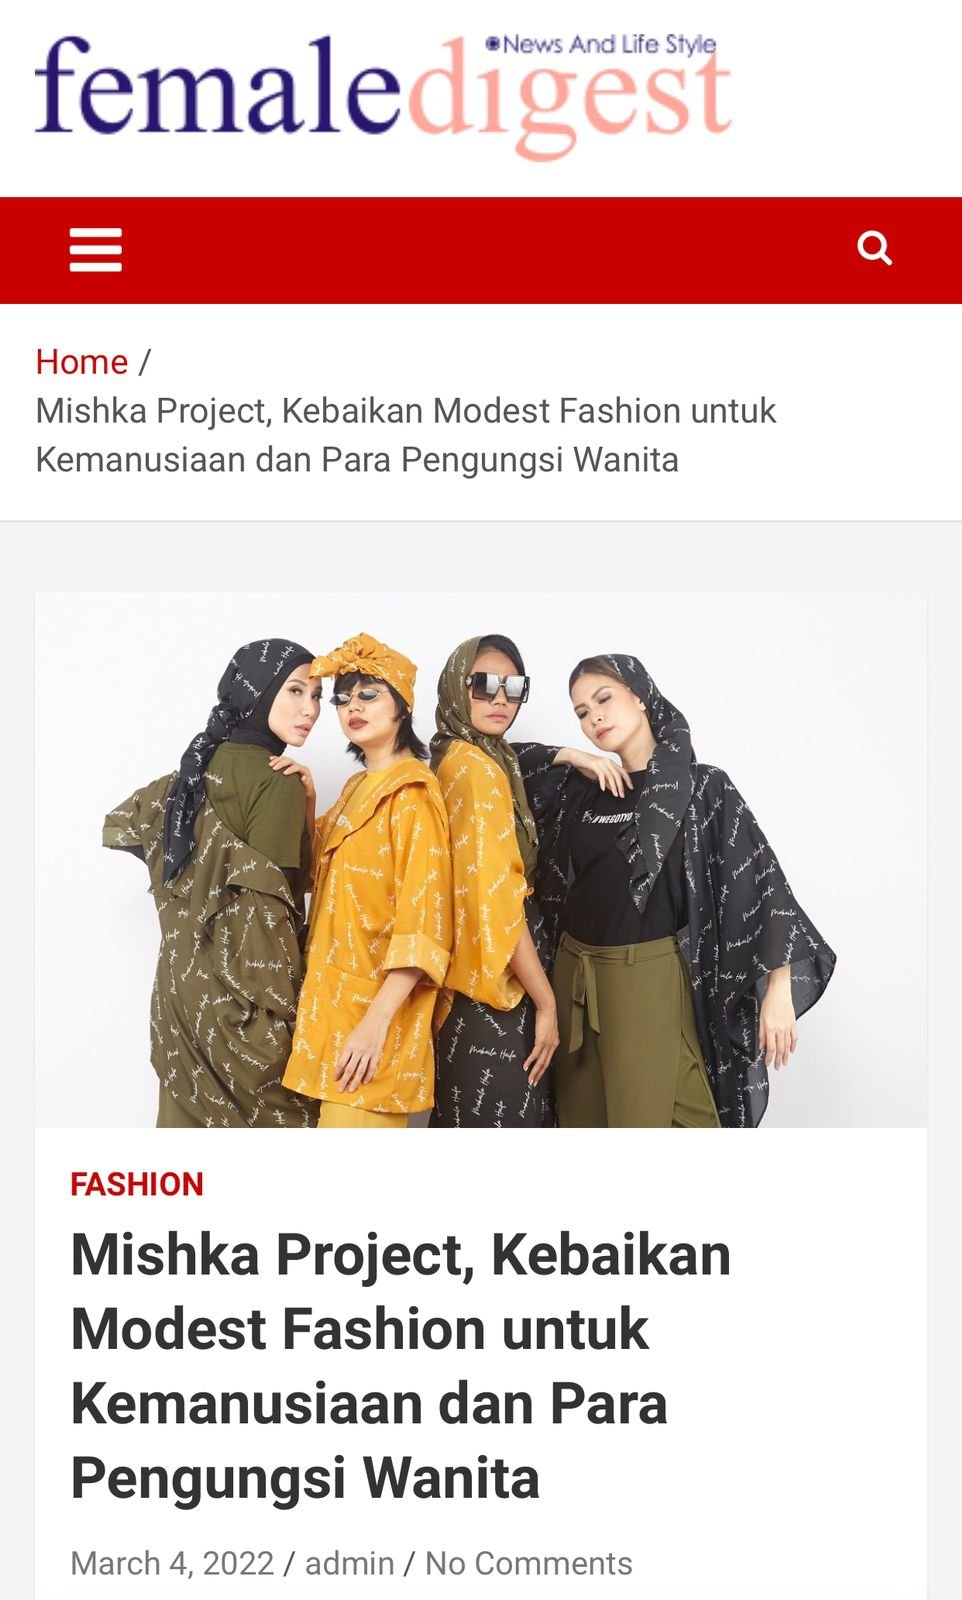 Mishka Project, Which Includes Refugee Women in Modest Fashion for Humanity